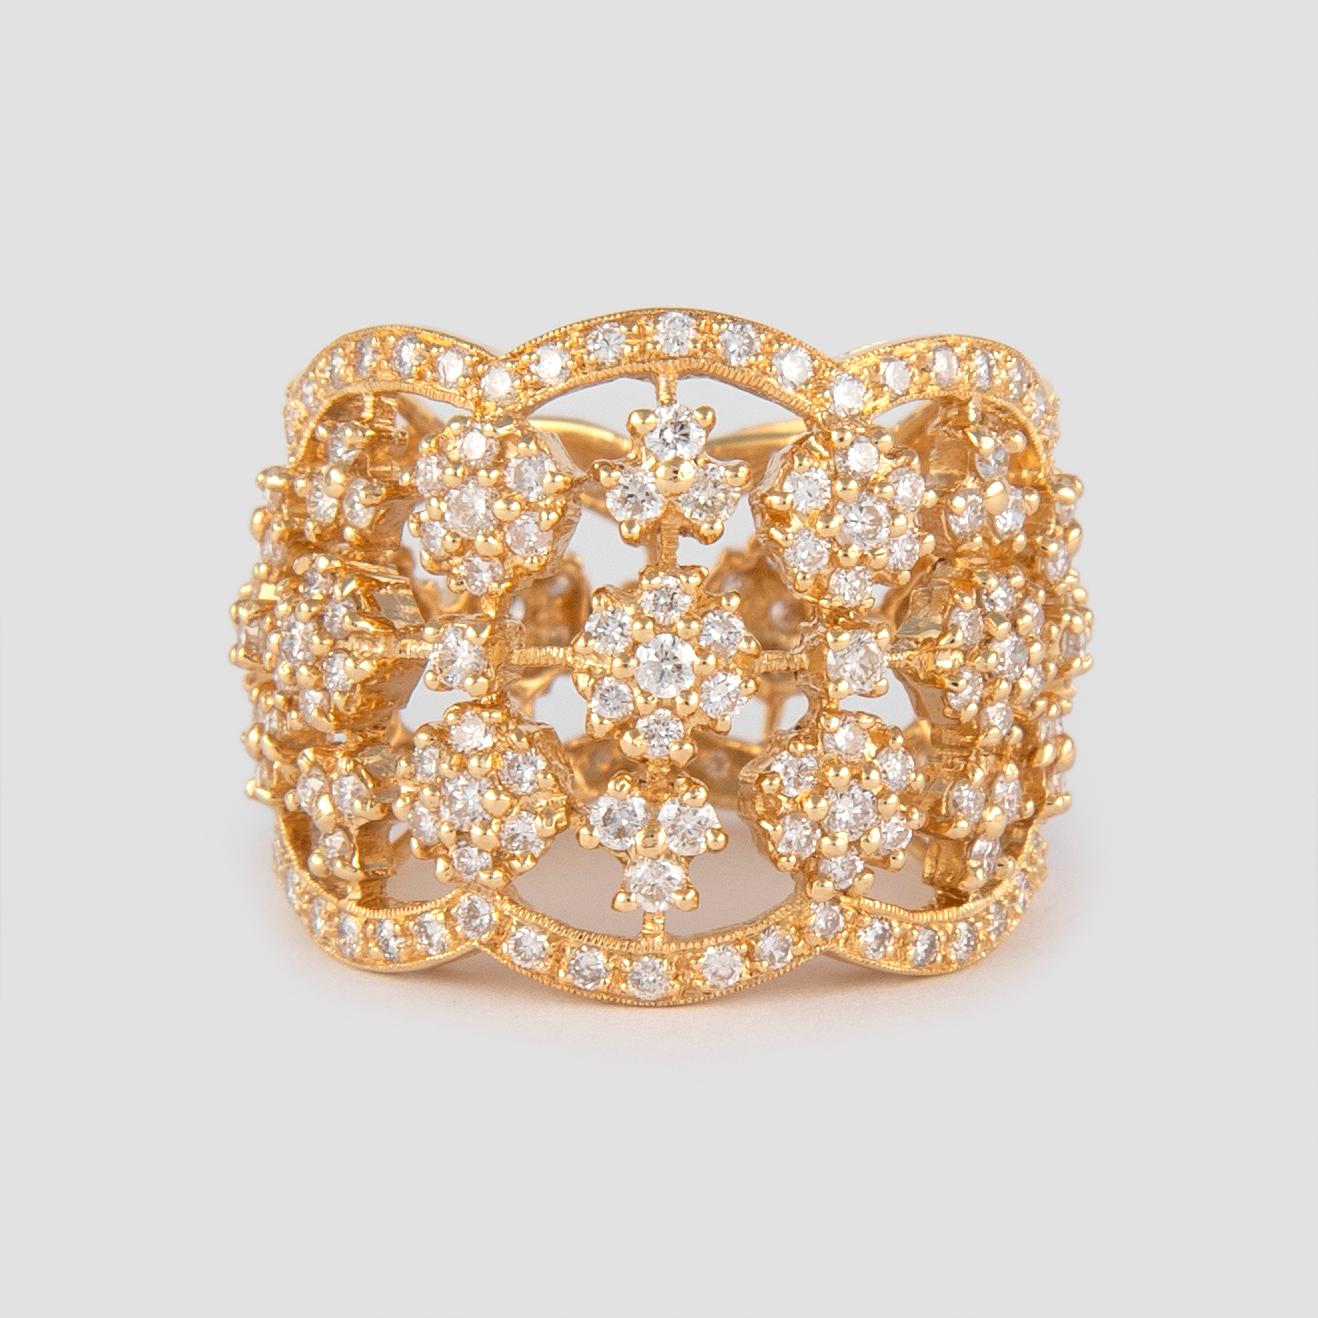 Women's 2.35 Carat Diamond and 18 Karat Yellow Gold Cocktail Ring For Sale